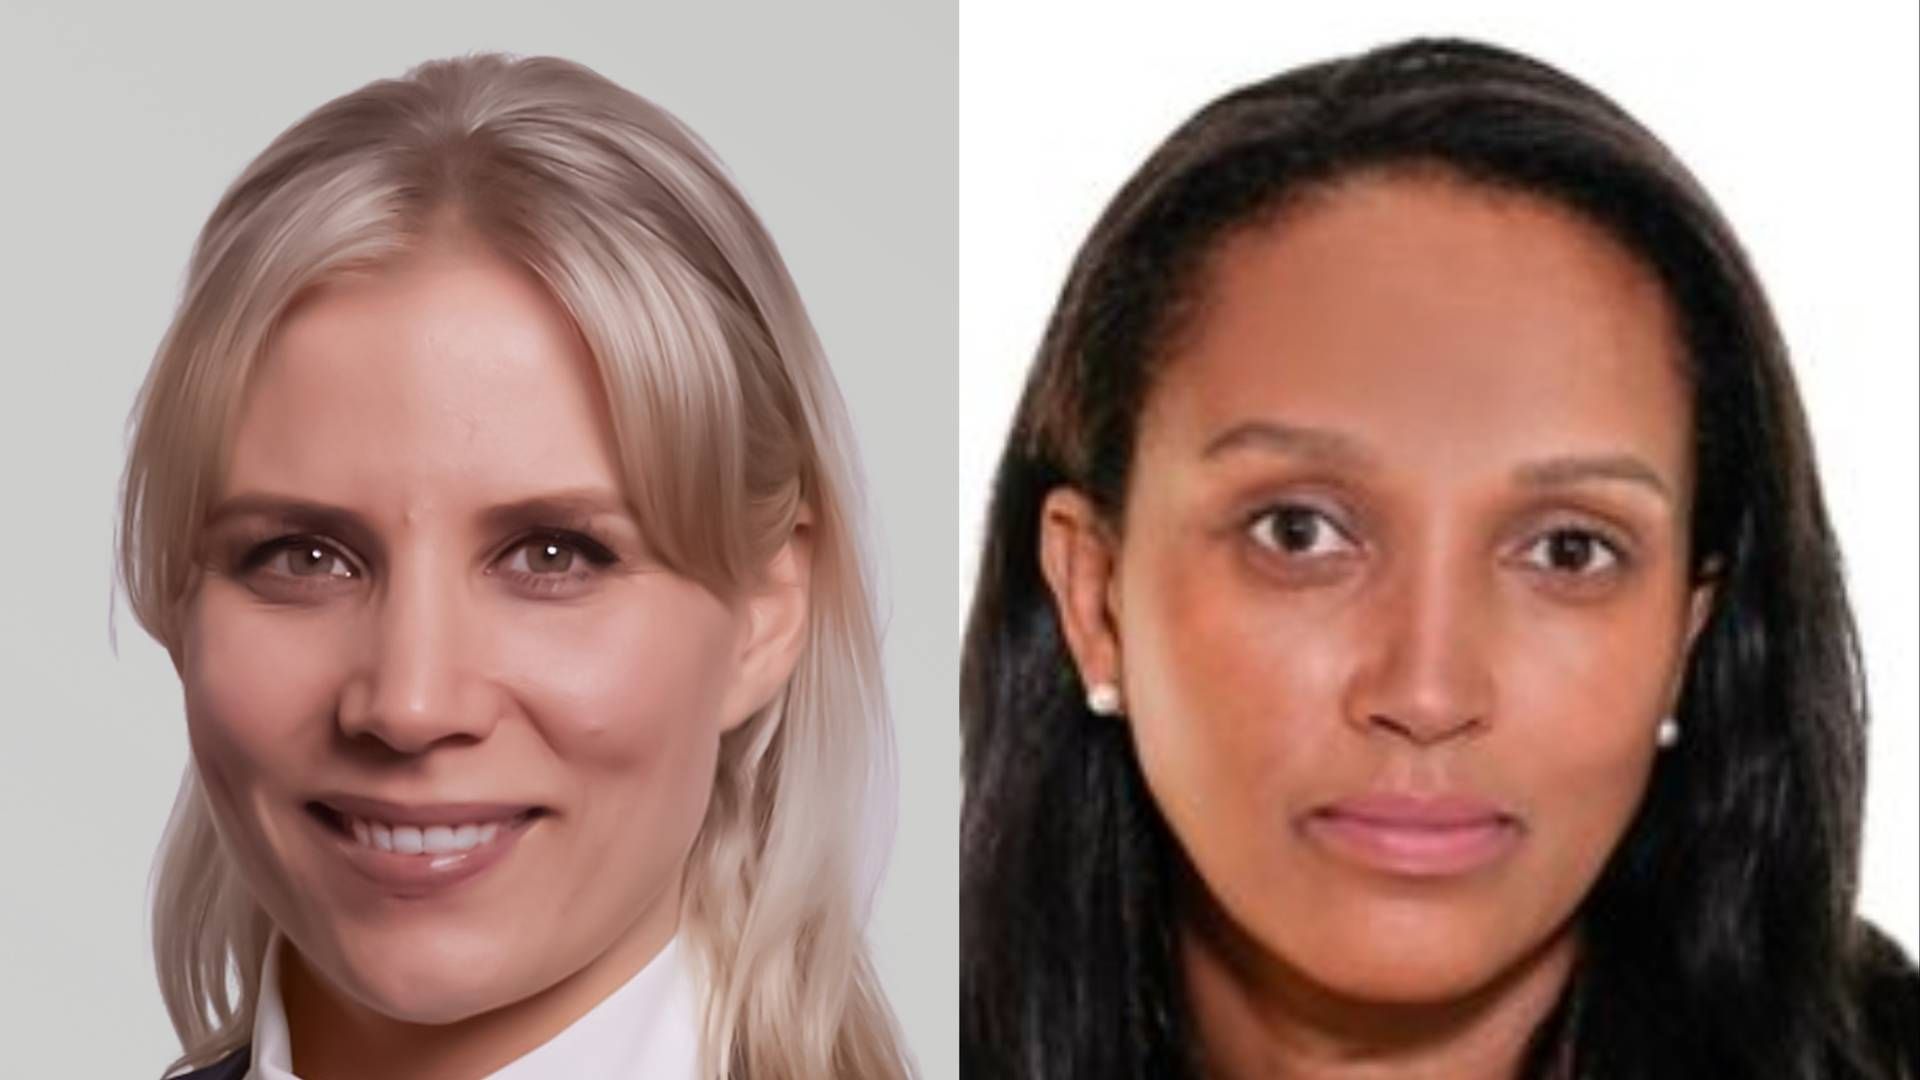 Elin Nävermo (left) has joined Amundi's Nordic HQ from the asset manager's German operation, while Senait Asgede has been promoted. | Photo: Amundi / PR